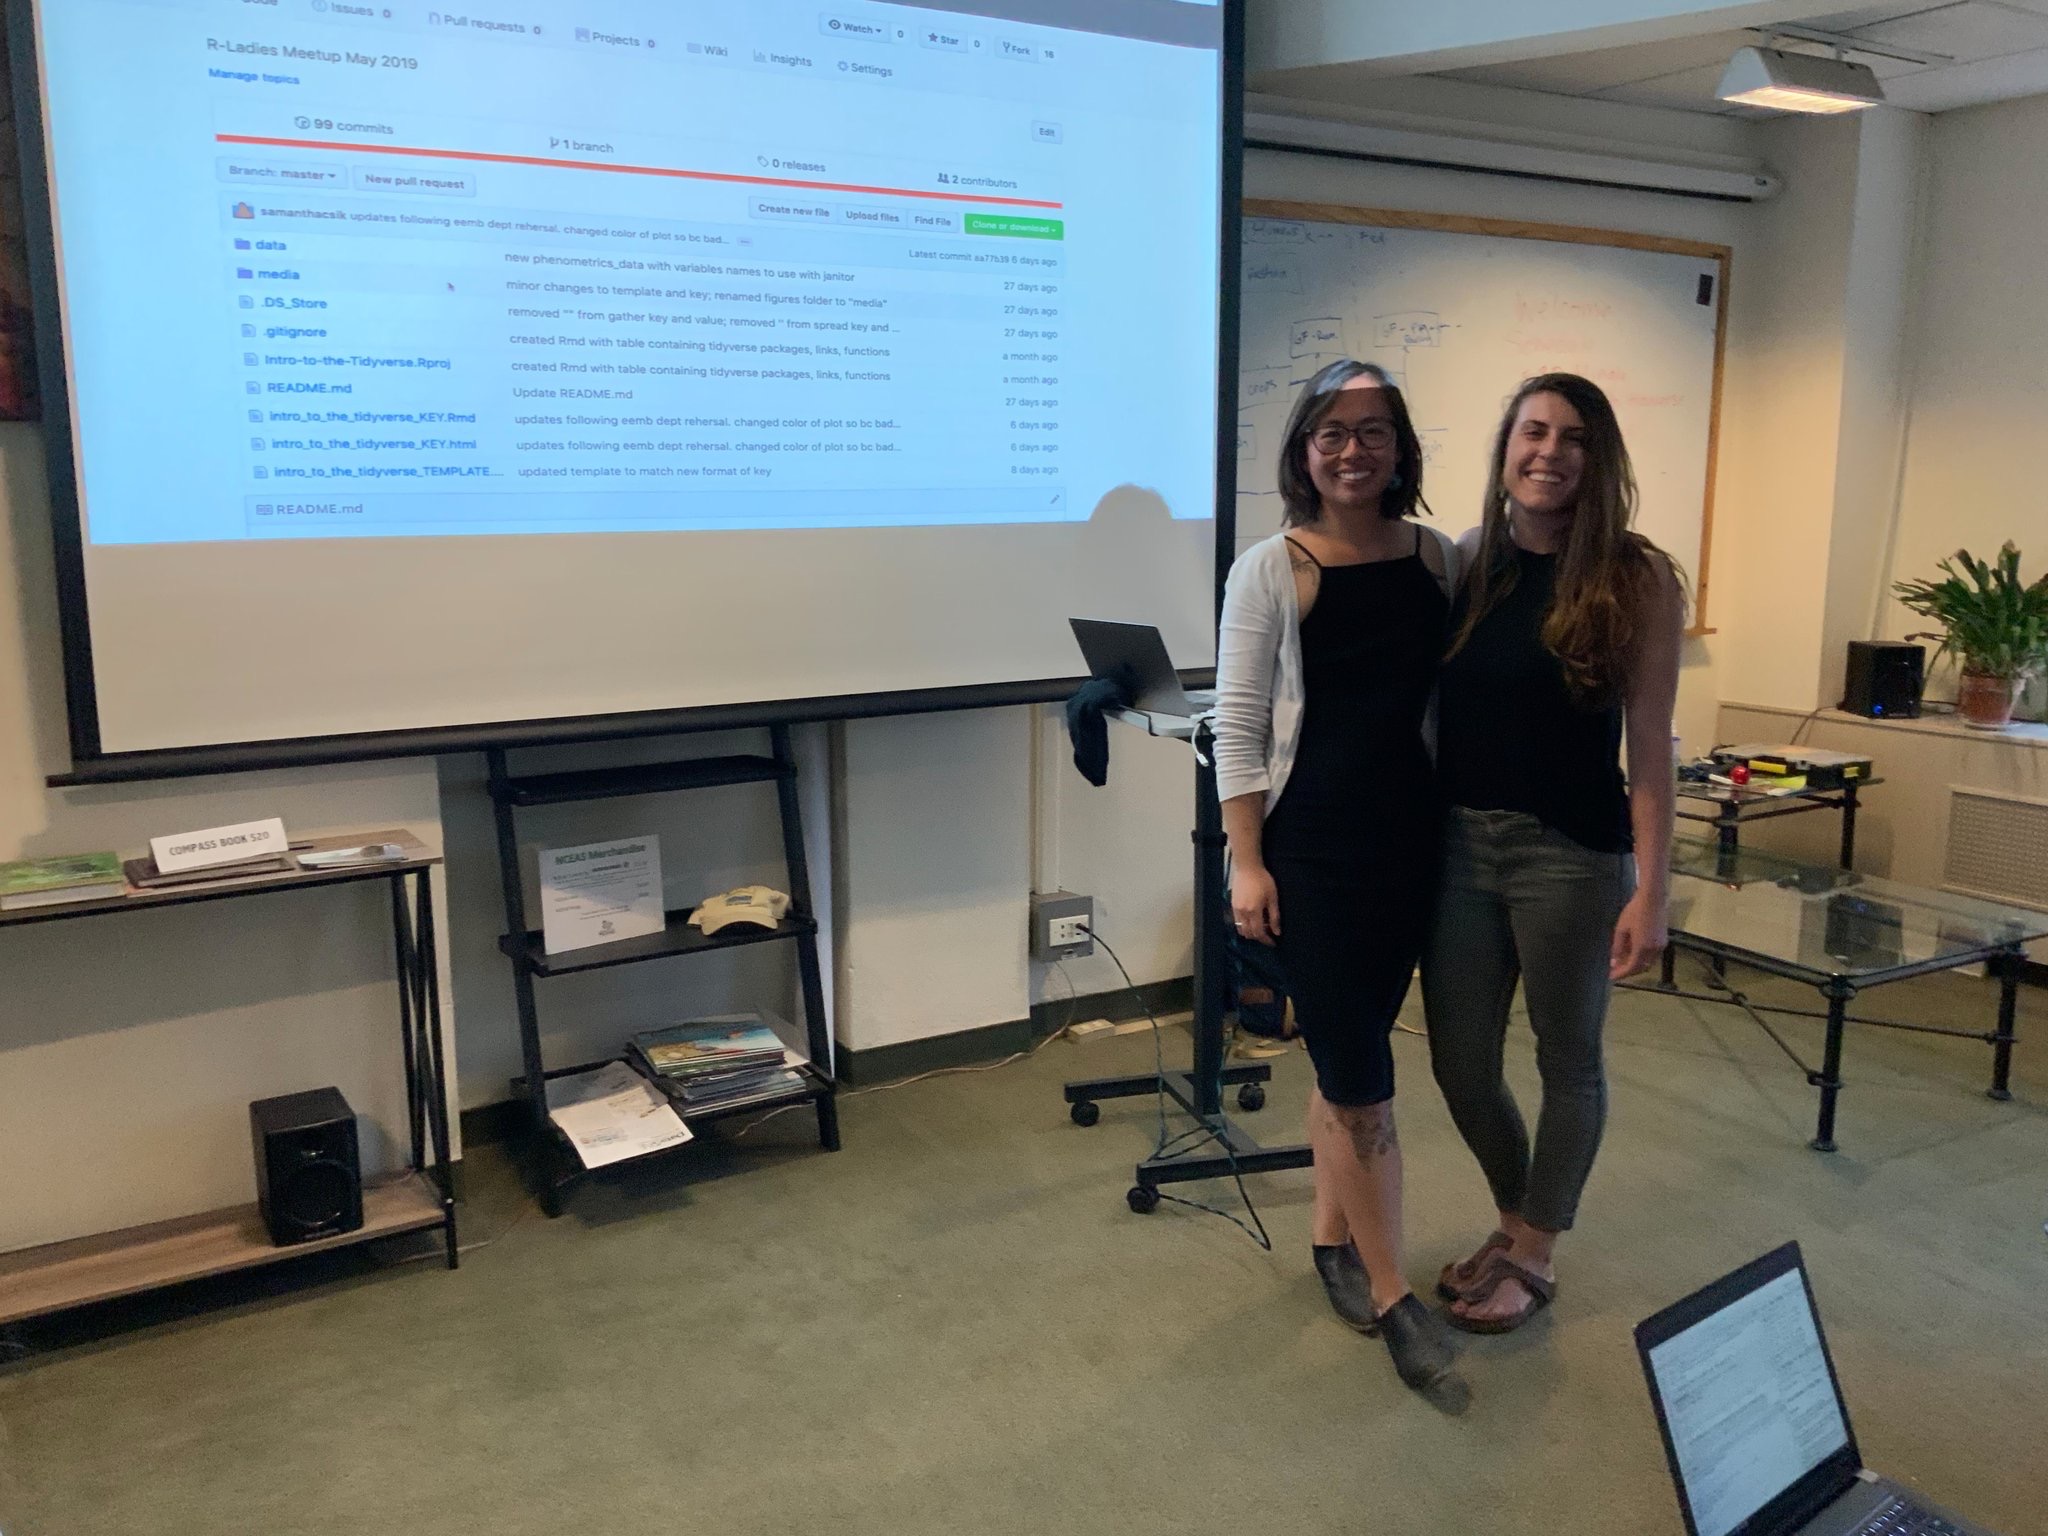 Two women, Sam and An, stand smiling in front of a projector screen with a GitHub repository on display.